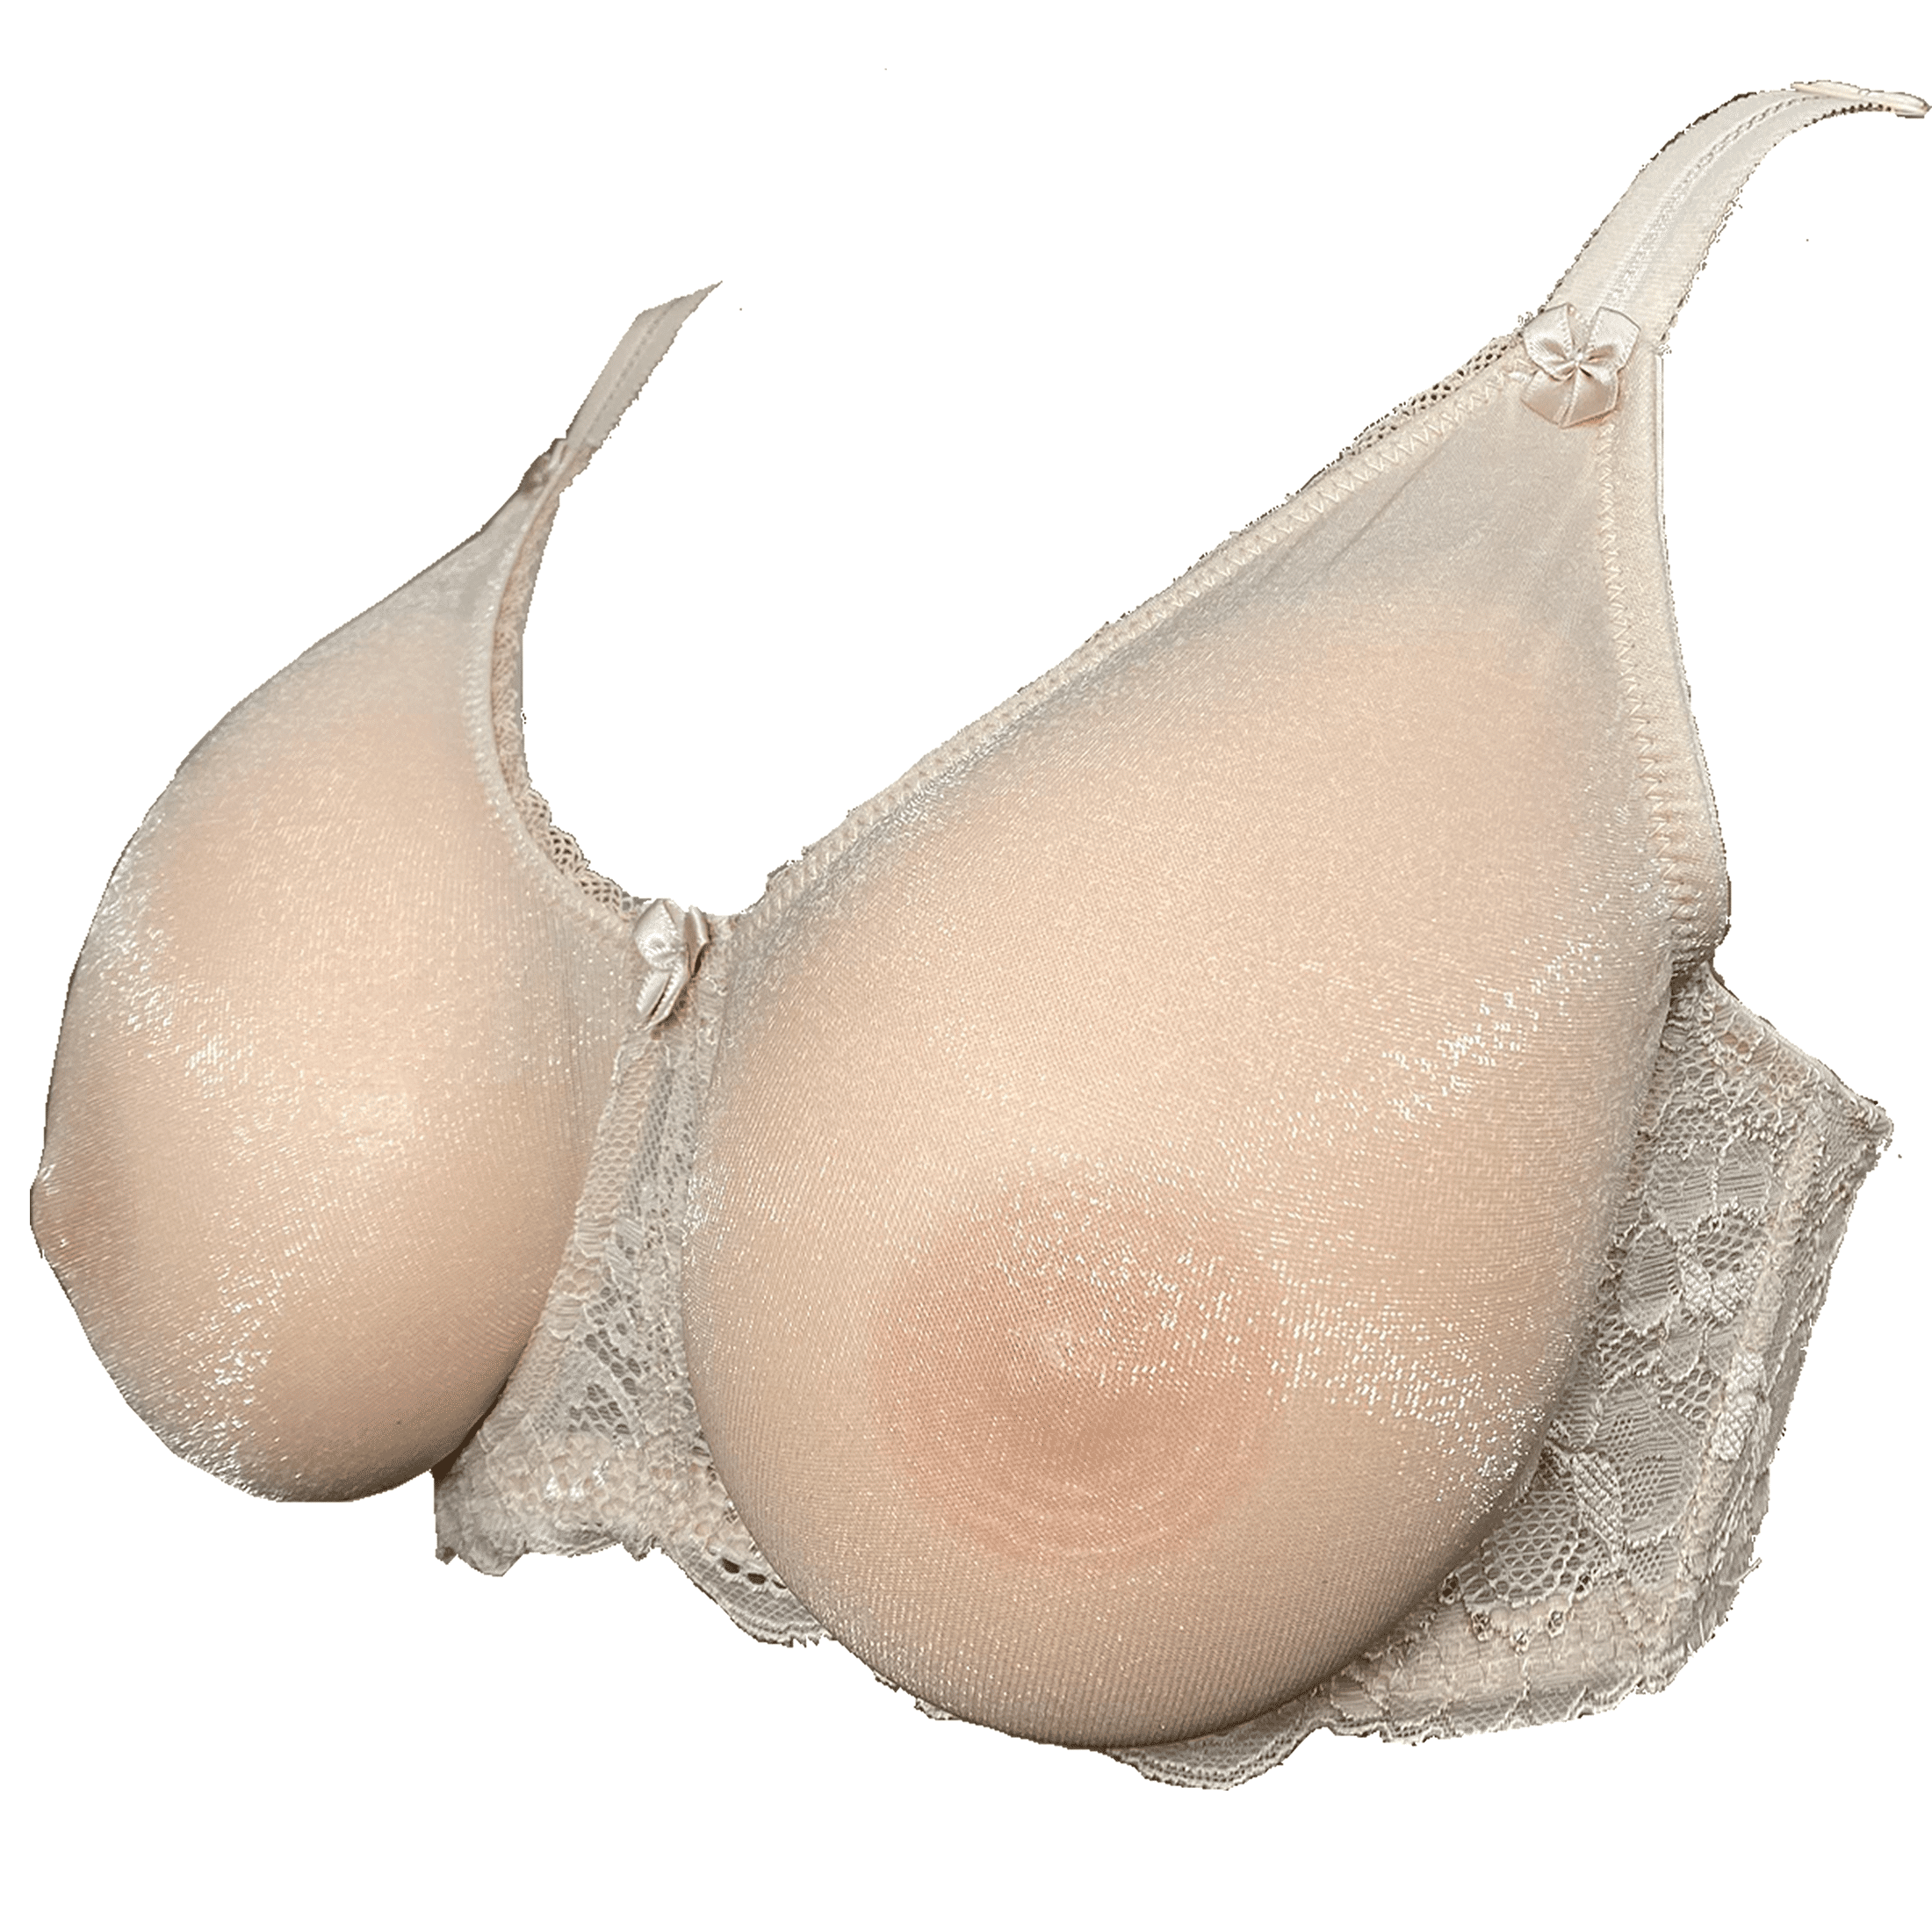 BIMEI See Through Bra CD Lace Mastectomy Lingerie Bra Silicone Breast Forms  Prosthesis Pocket Bra with Steel Ring 9018,Beige,36B